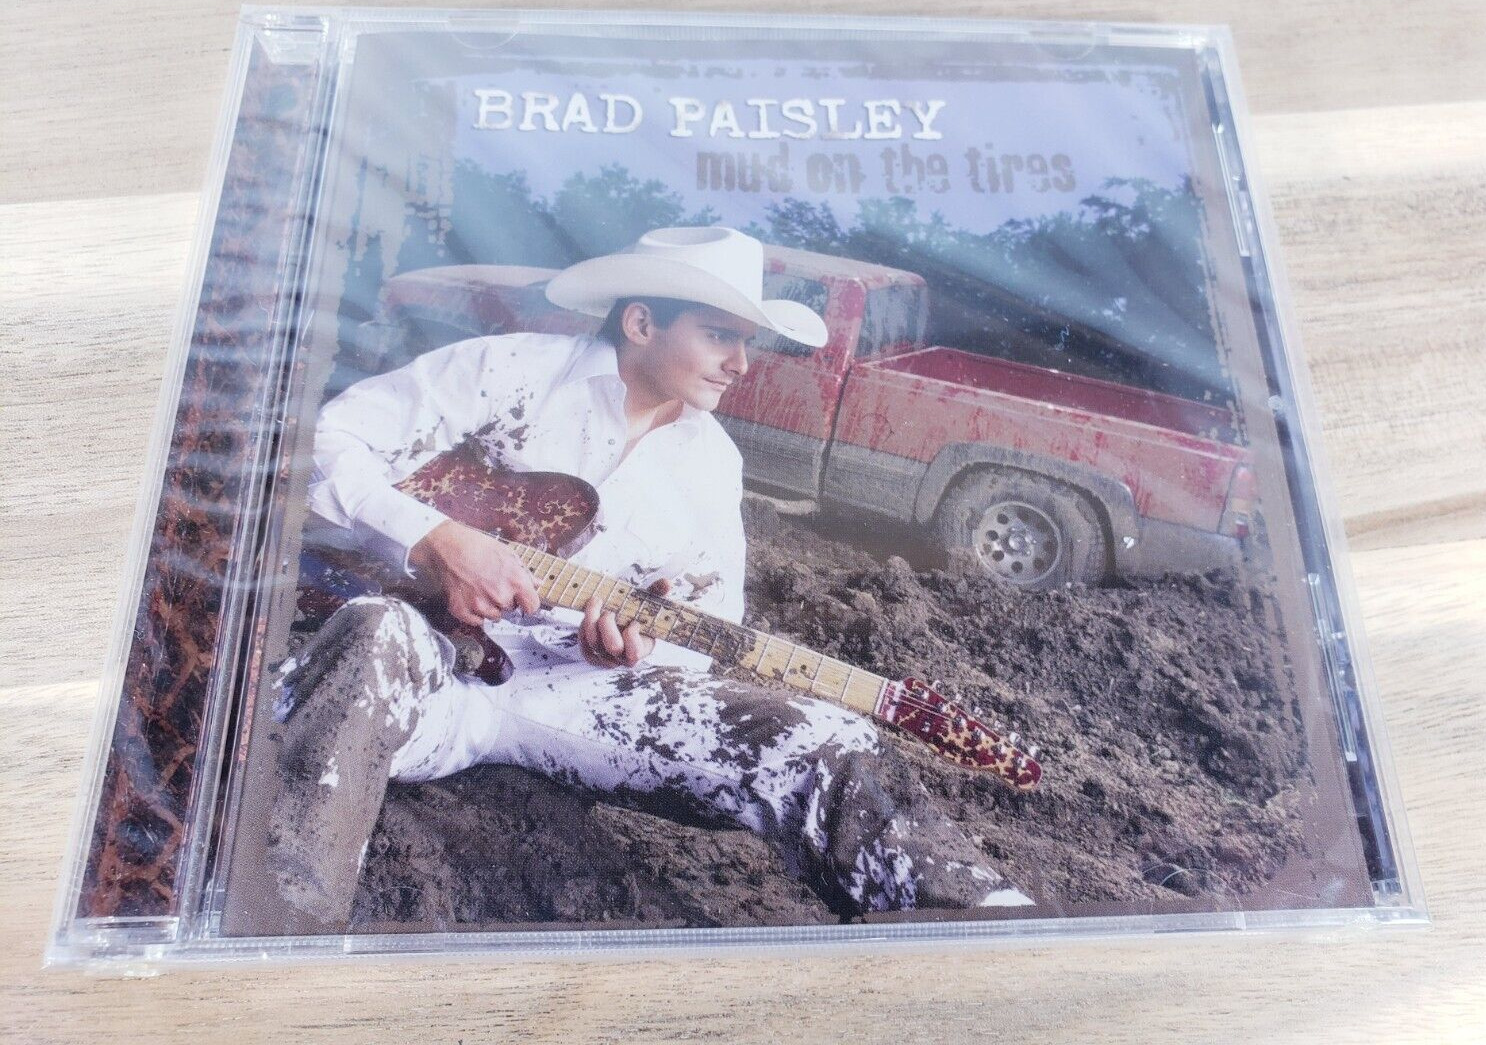 BRAD PAISLEY : Mud on the Tires (CD, 2003) Brand New Sealed Country